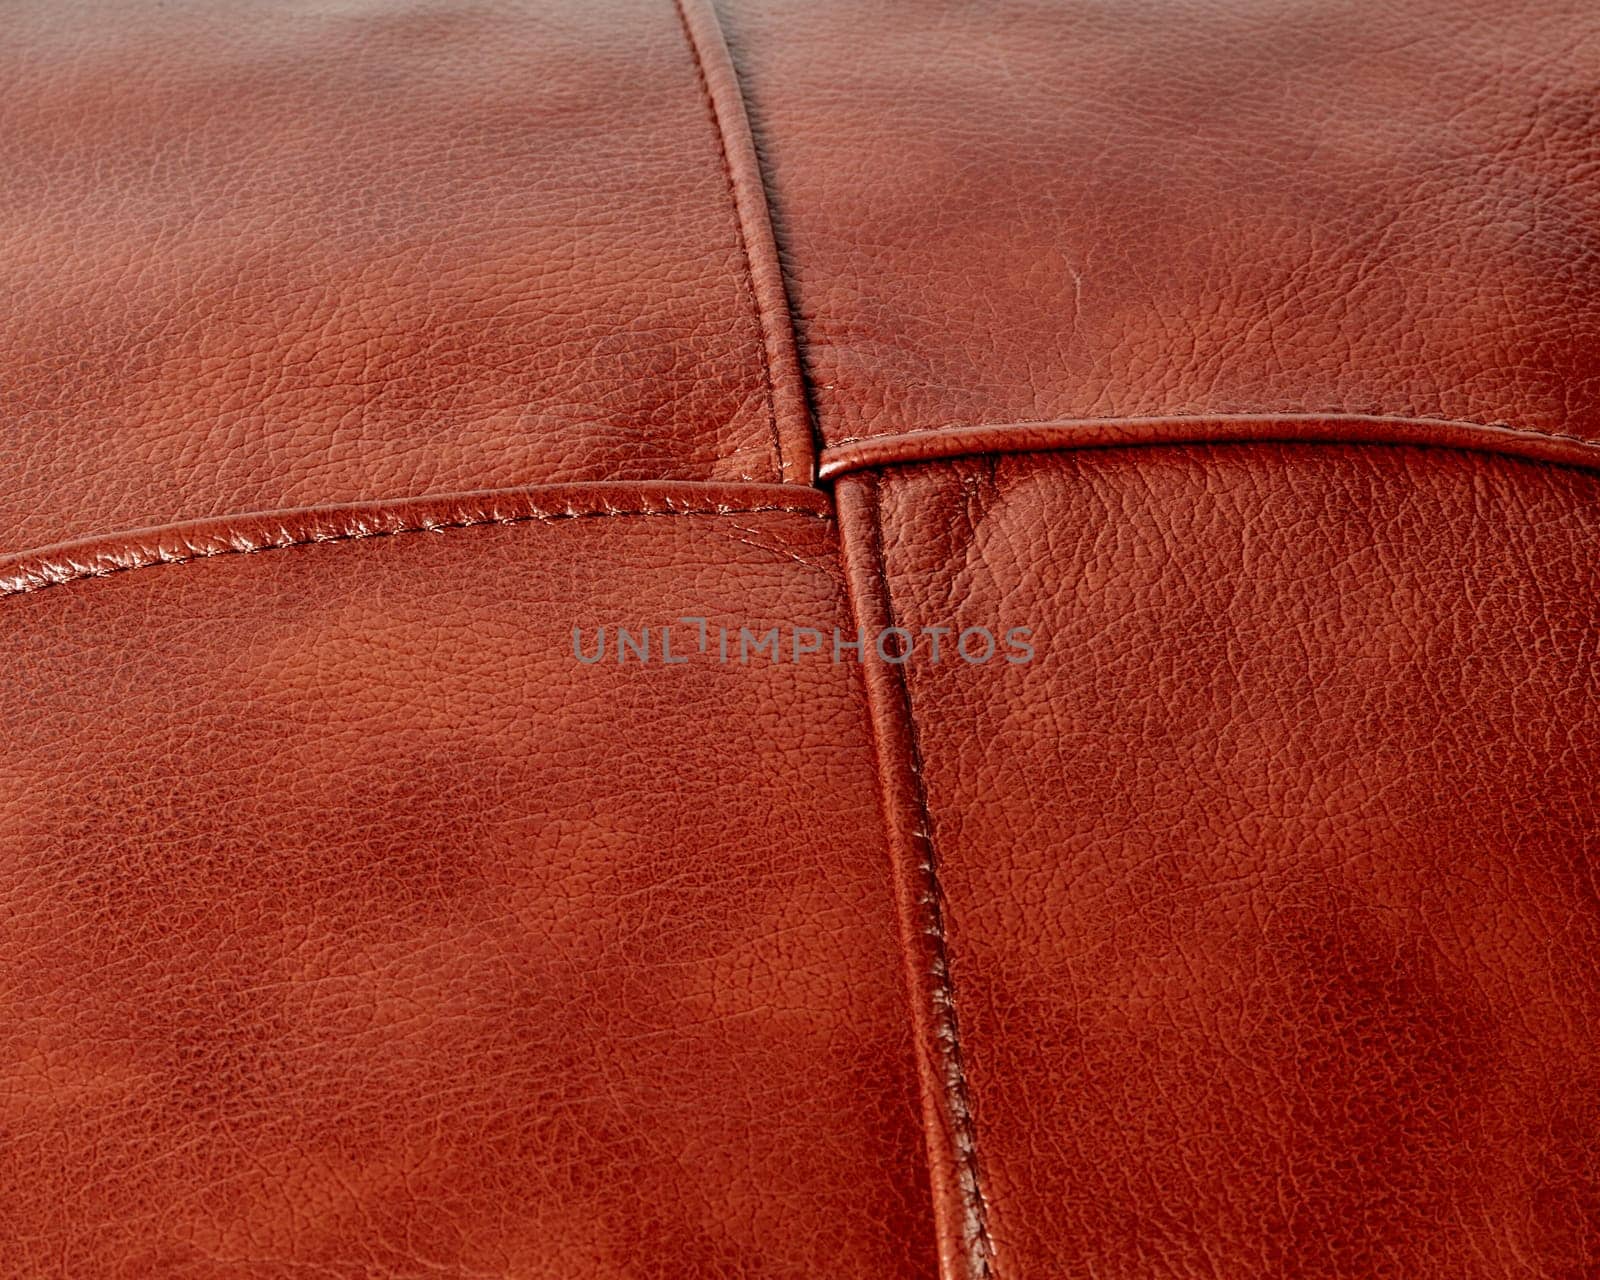 Background of stitched square patches of copper-coloured leather by nazarovsergey